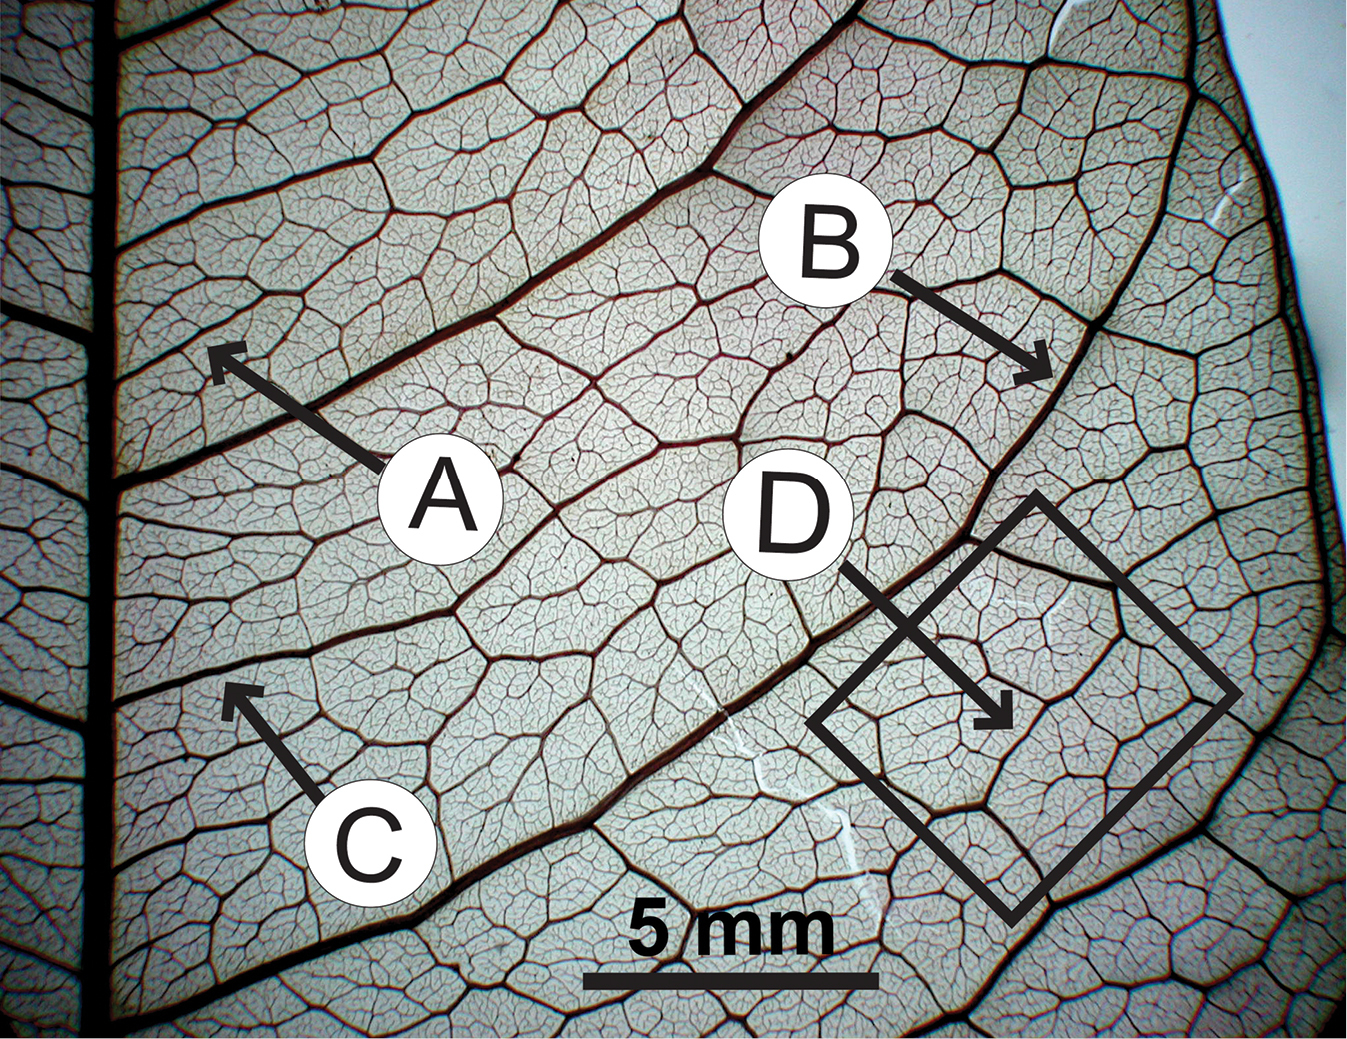 Black and white image of a portion of a cleared leaf of hog plum labeled to illustrate features of the secondary and tertiary venation.